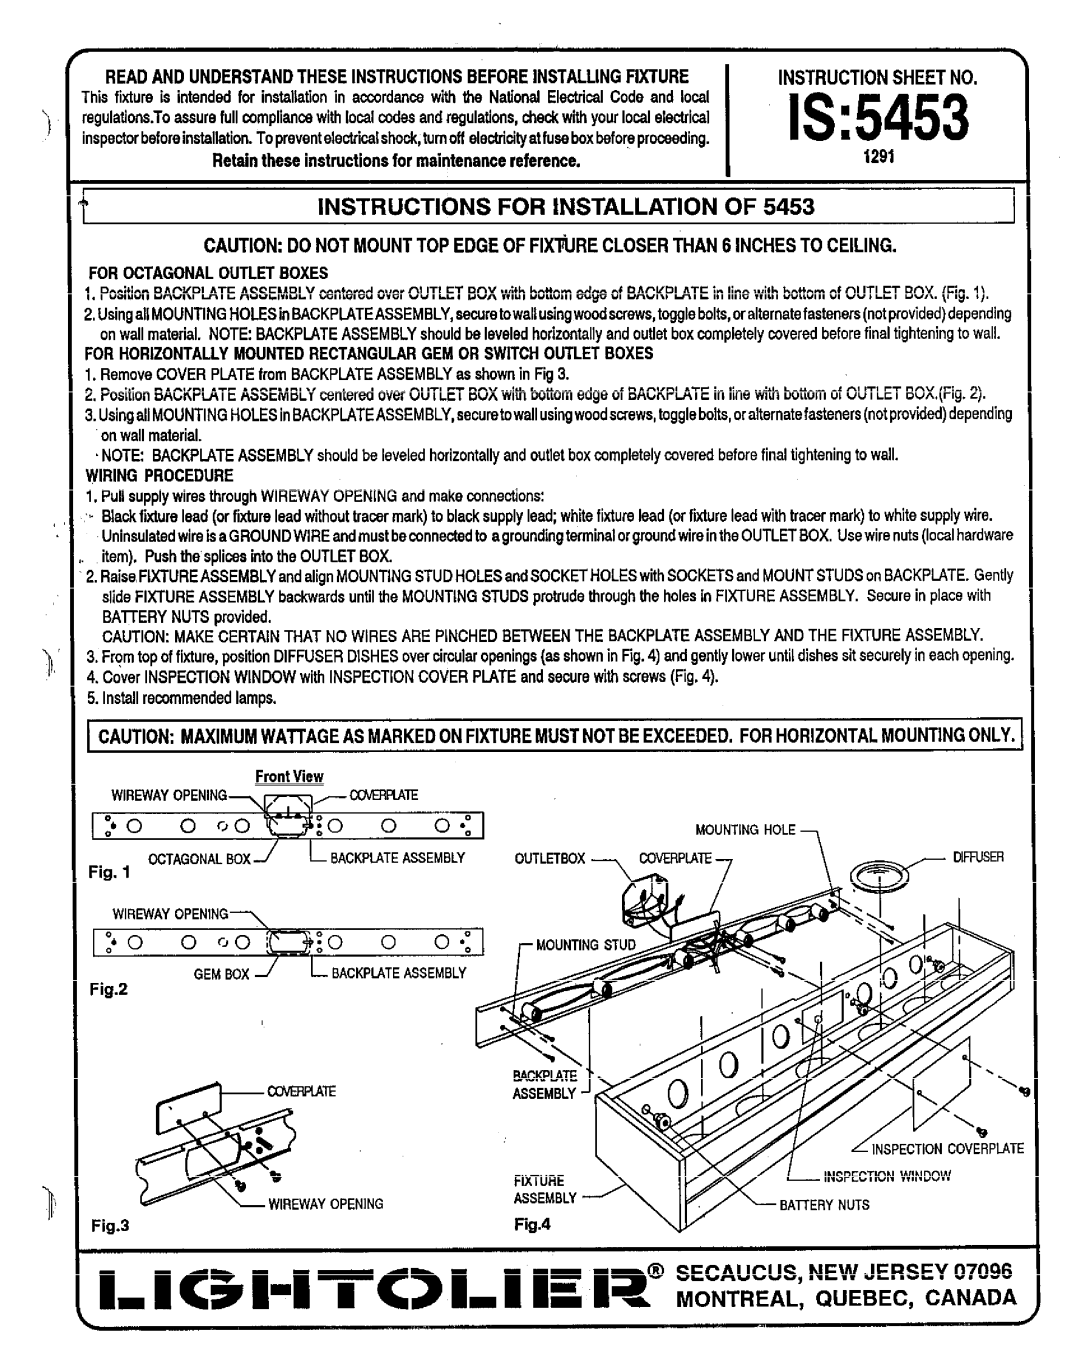 Lightolier IS:5453 instruction sheet Is, Instructions For Installation Of 